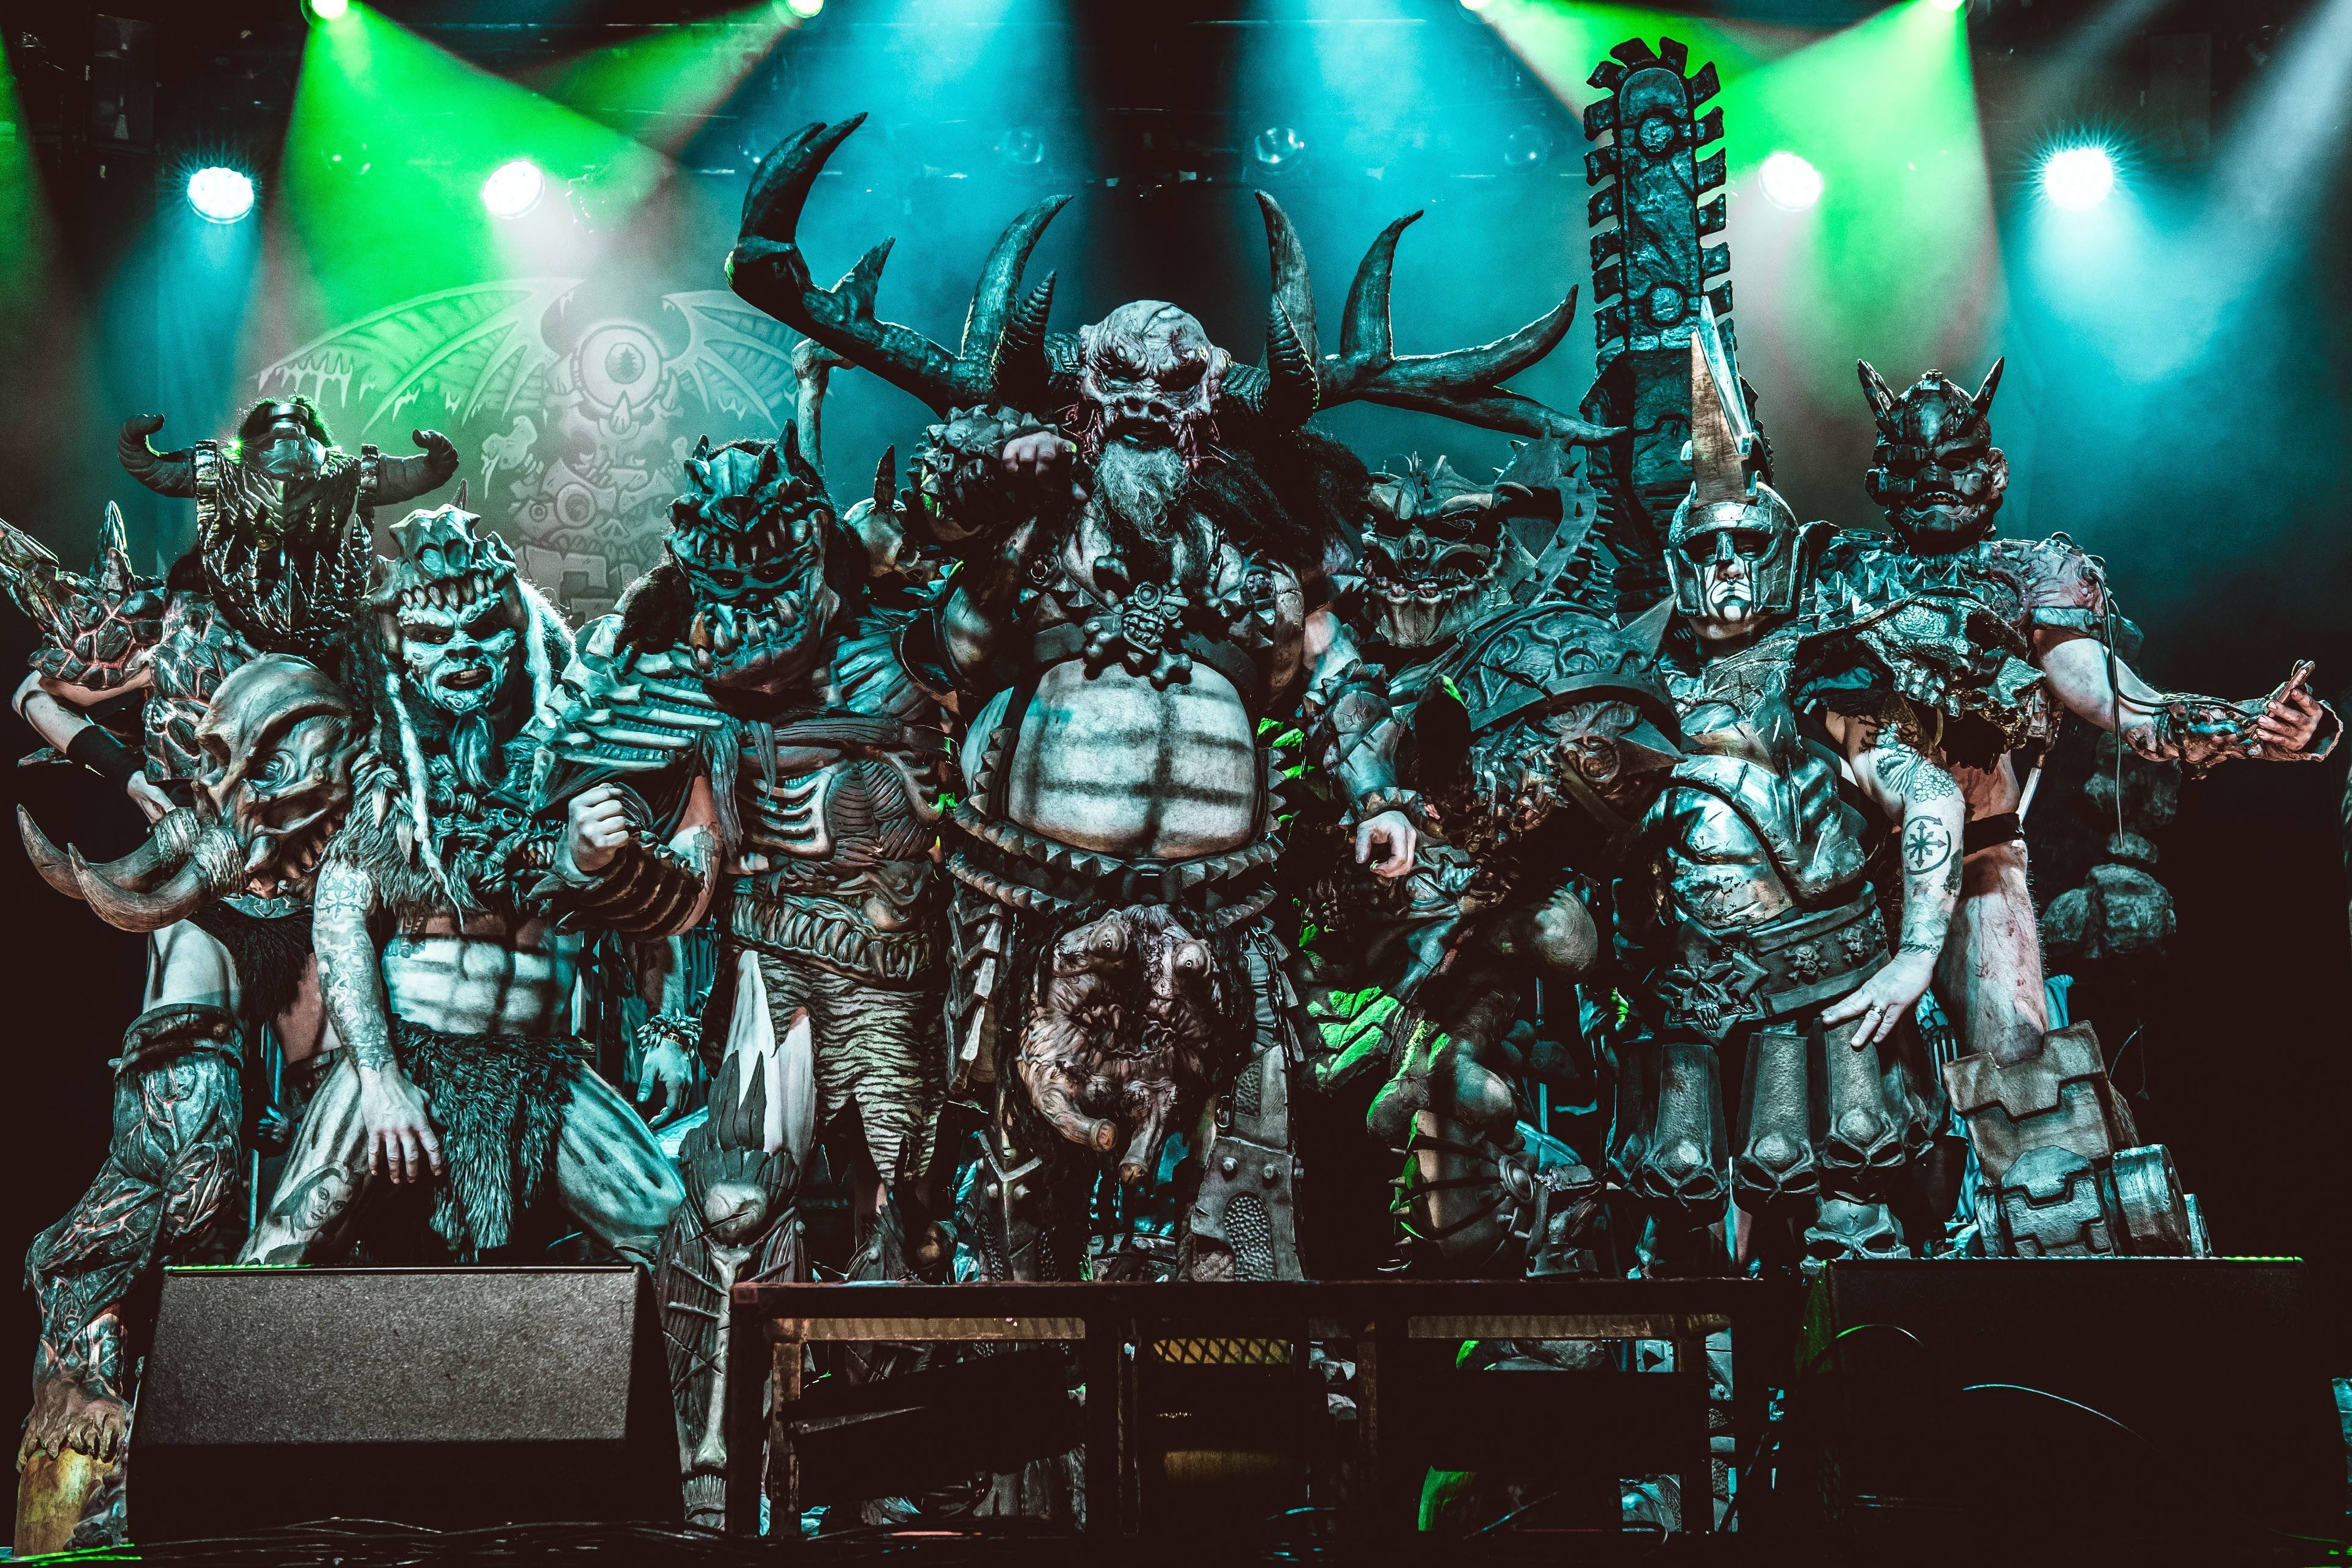 GWAR w/ Brujeria, Cancer Christ, and BRAT at The Hall